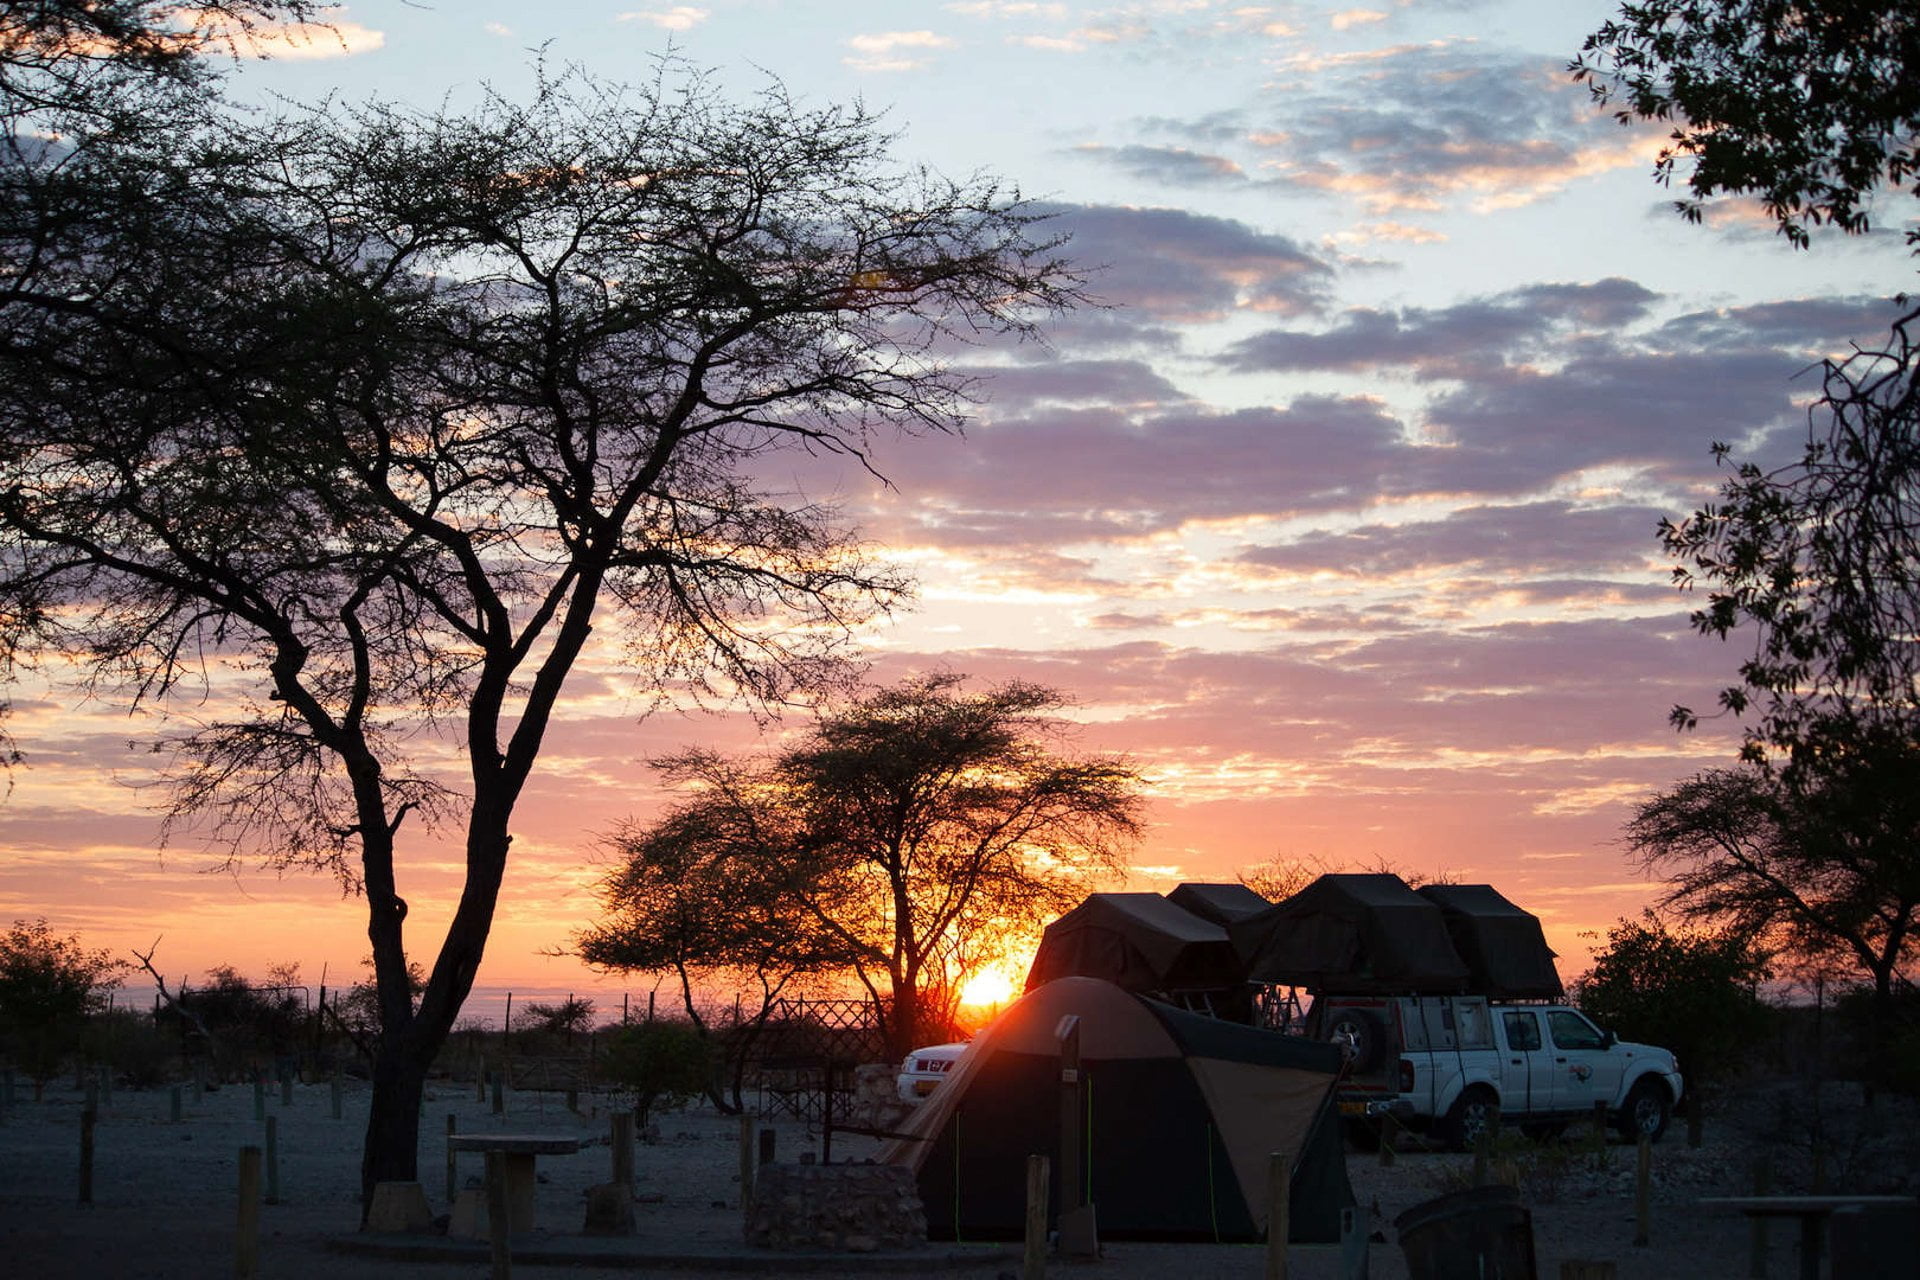 Sunrise at Okaukuejo Camp in Etosha with camper trucks in the foreground.